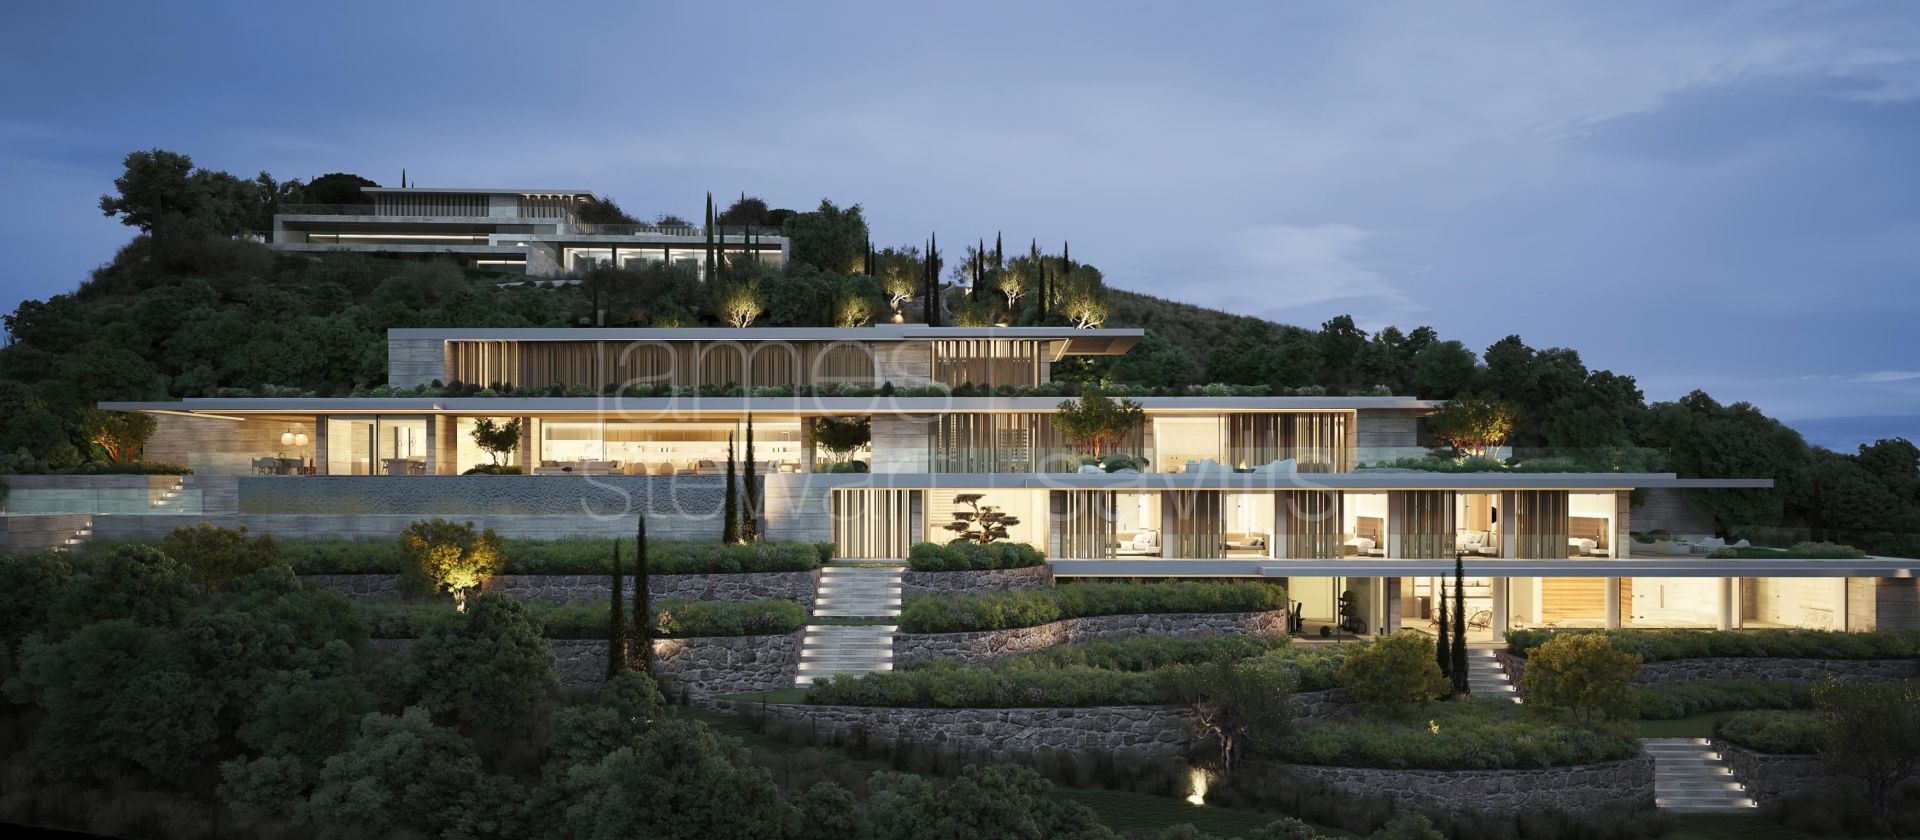 SANCTUARY VILLA - great privacy and fantastic views in La Reserva to be completed by 2024